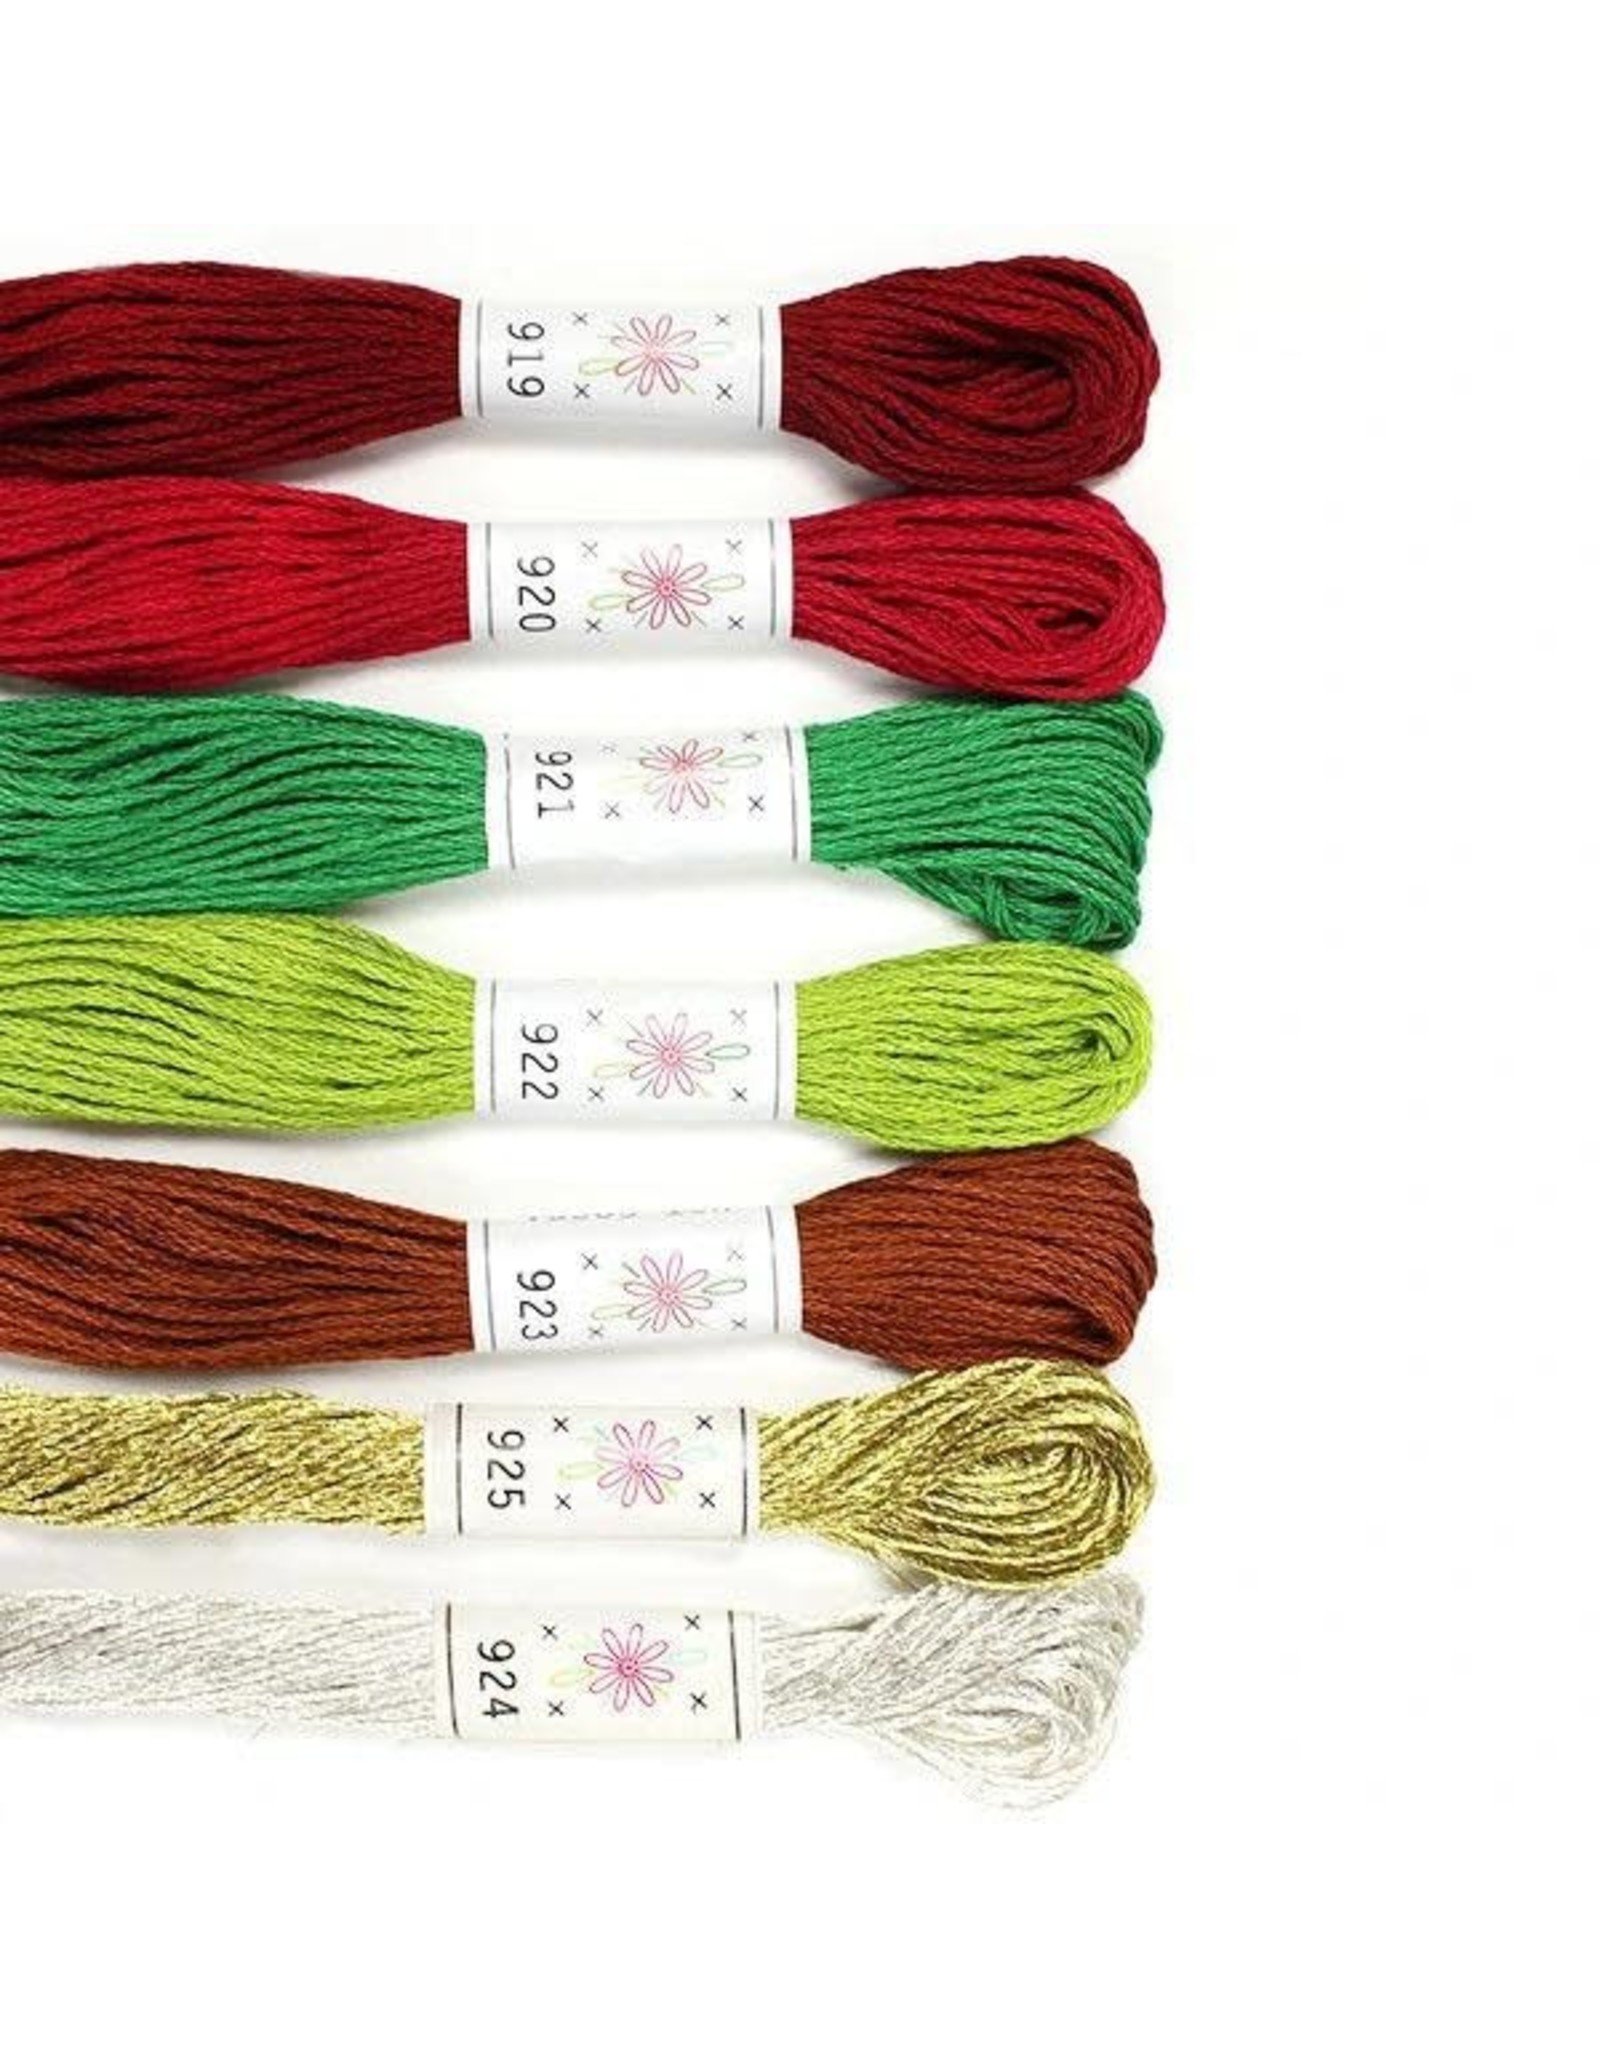 Sublime Stitching Embroidery Floss Set, Christmas Tree Palette - Seven 8.75  yard skeins